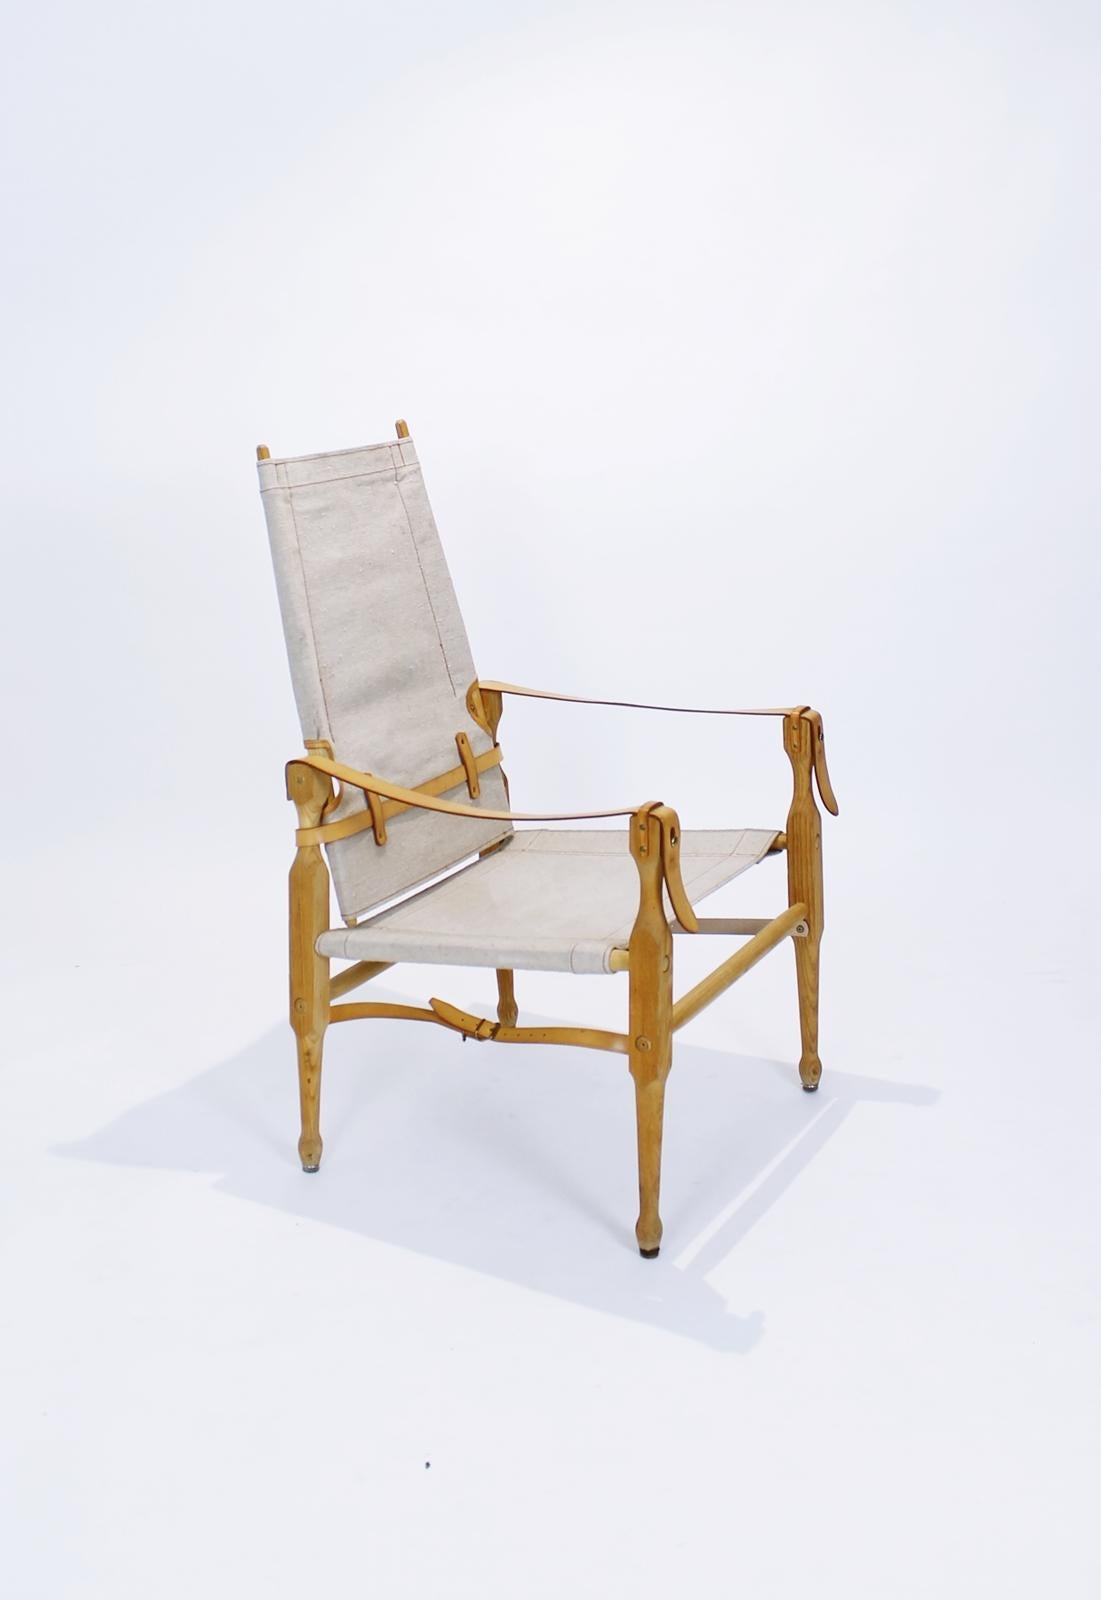 There are two original Marstaller Safari chairs, the so-called 